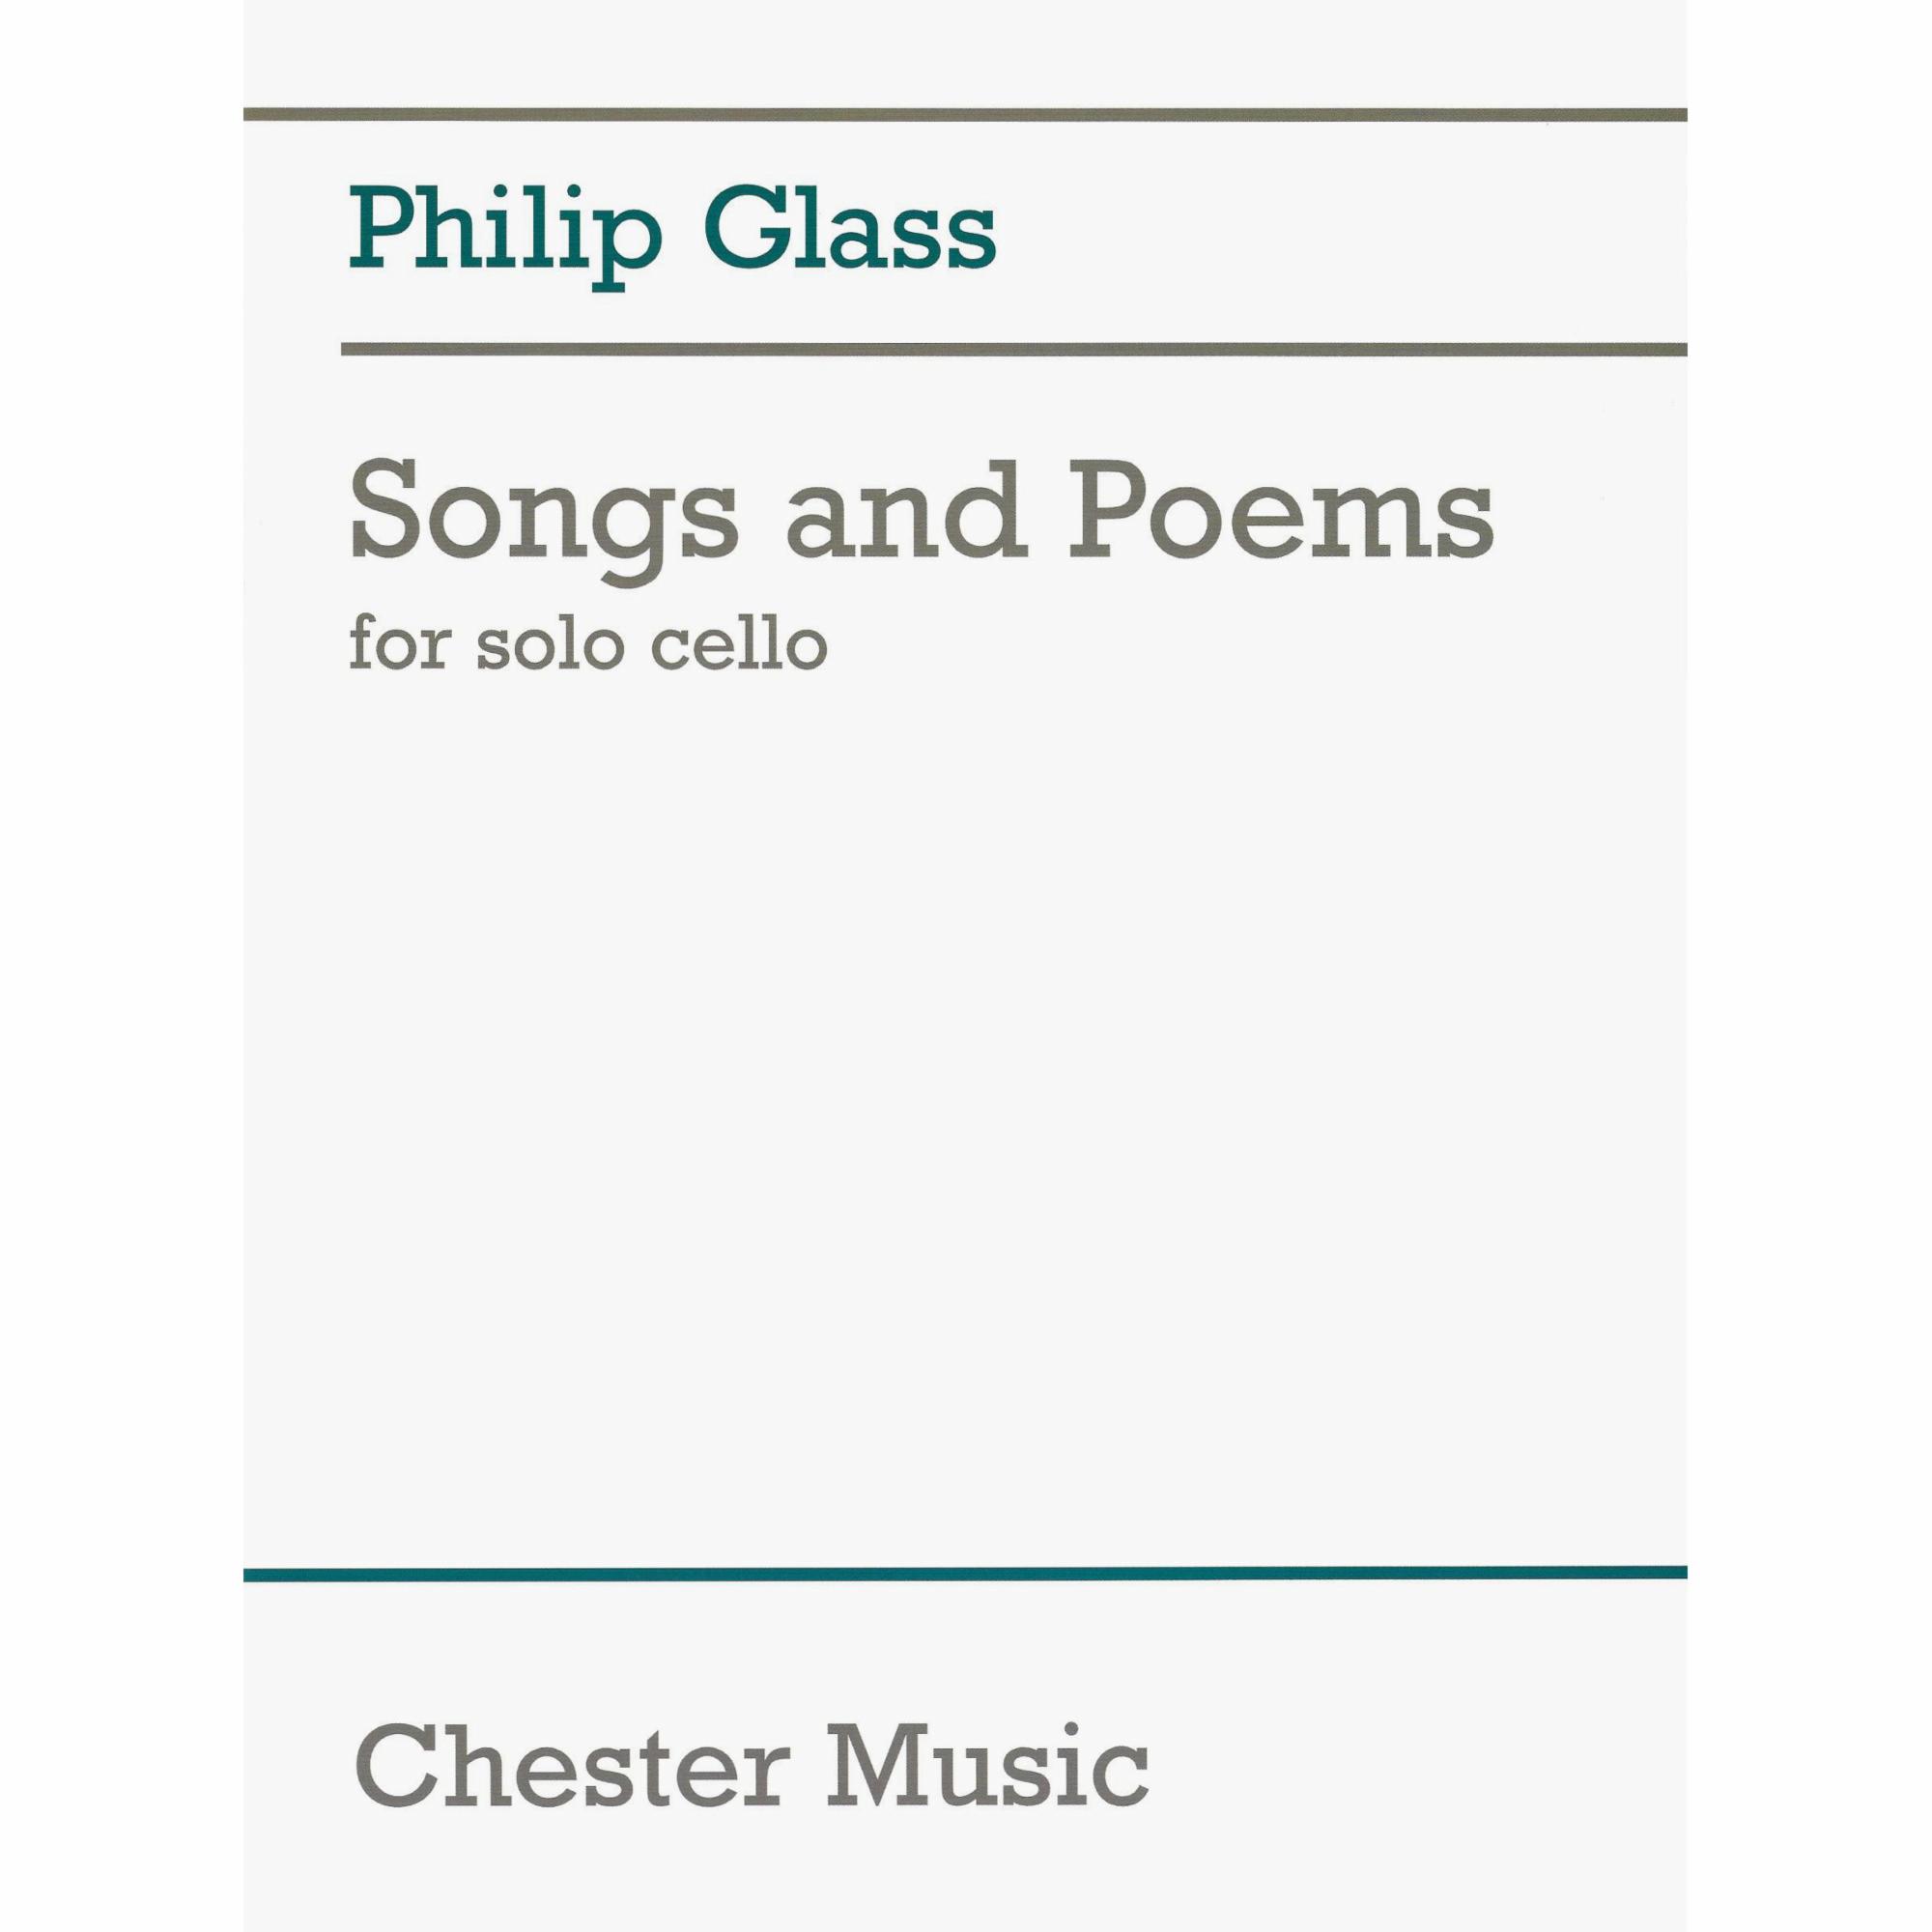 Glass -- Songs and Poems for Solo Cello